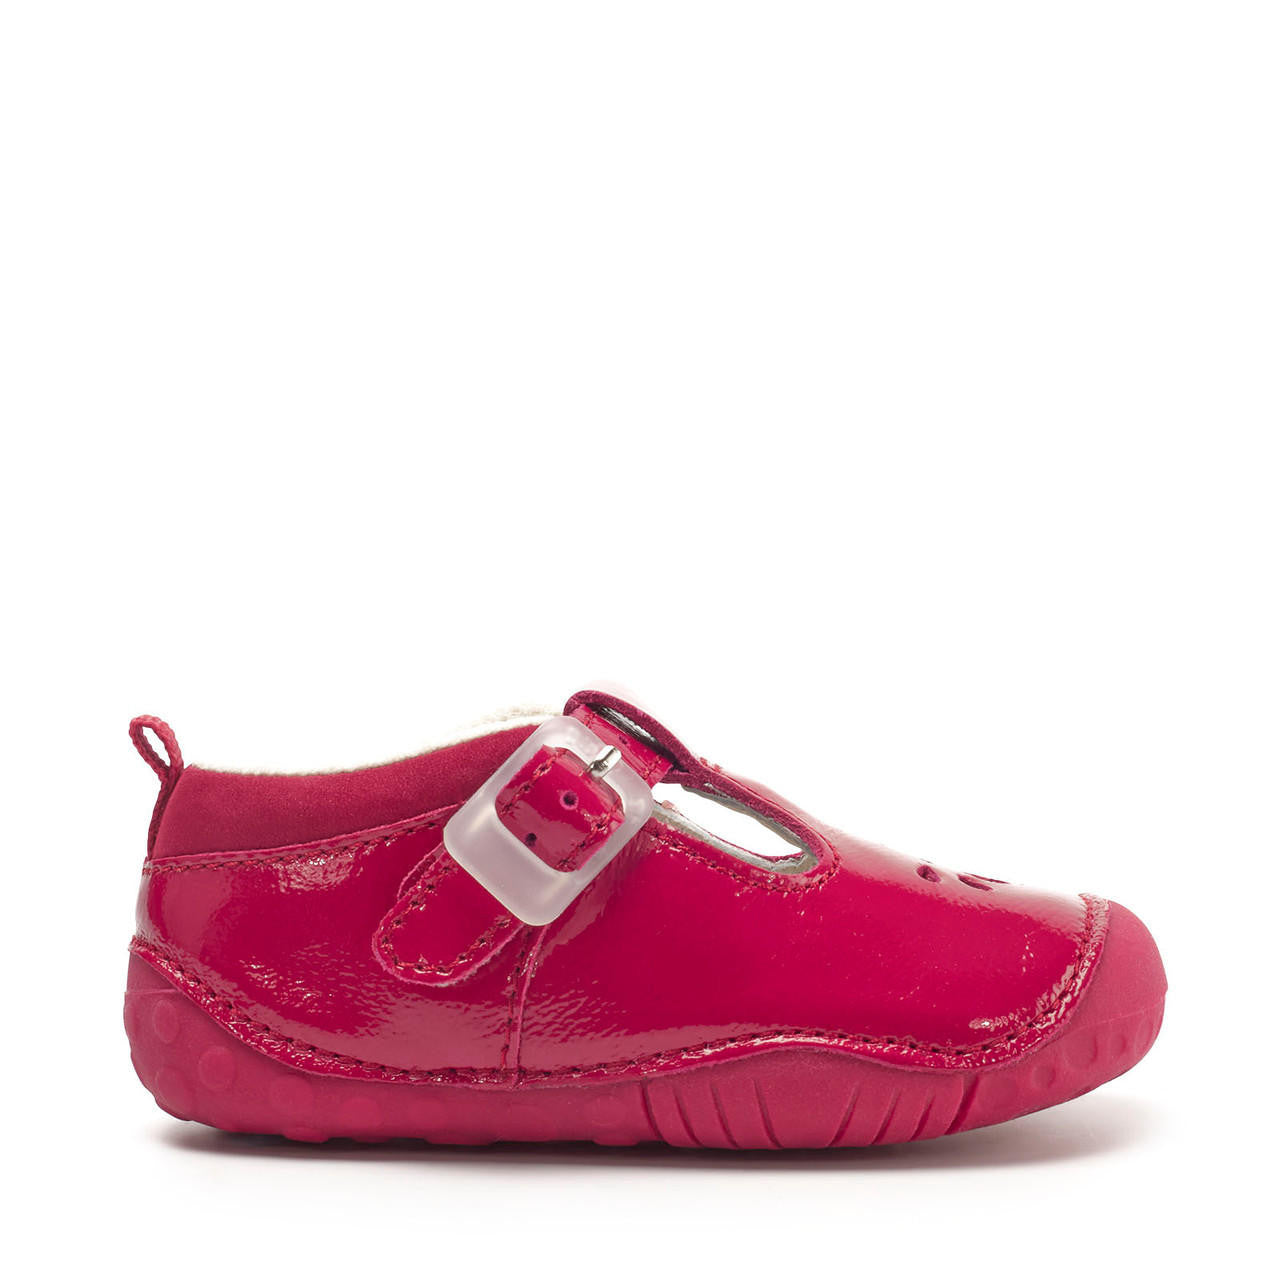 A girls T-Bar pre-walker by Start-Rite, style Baby Bubble, in red patent leather with silver punch out detail and toe bumper. Buckle fastening. Right side view.